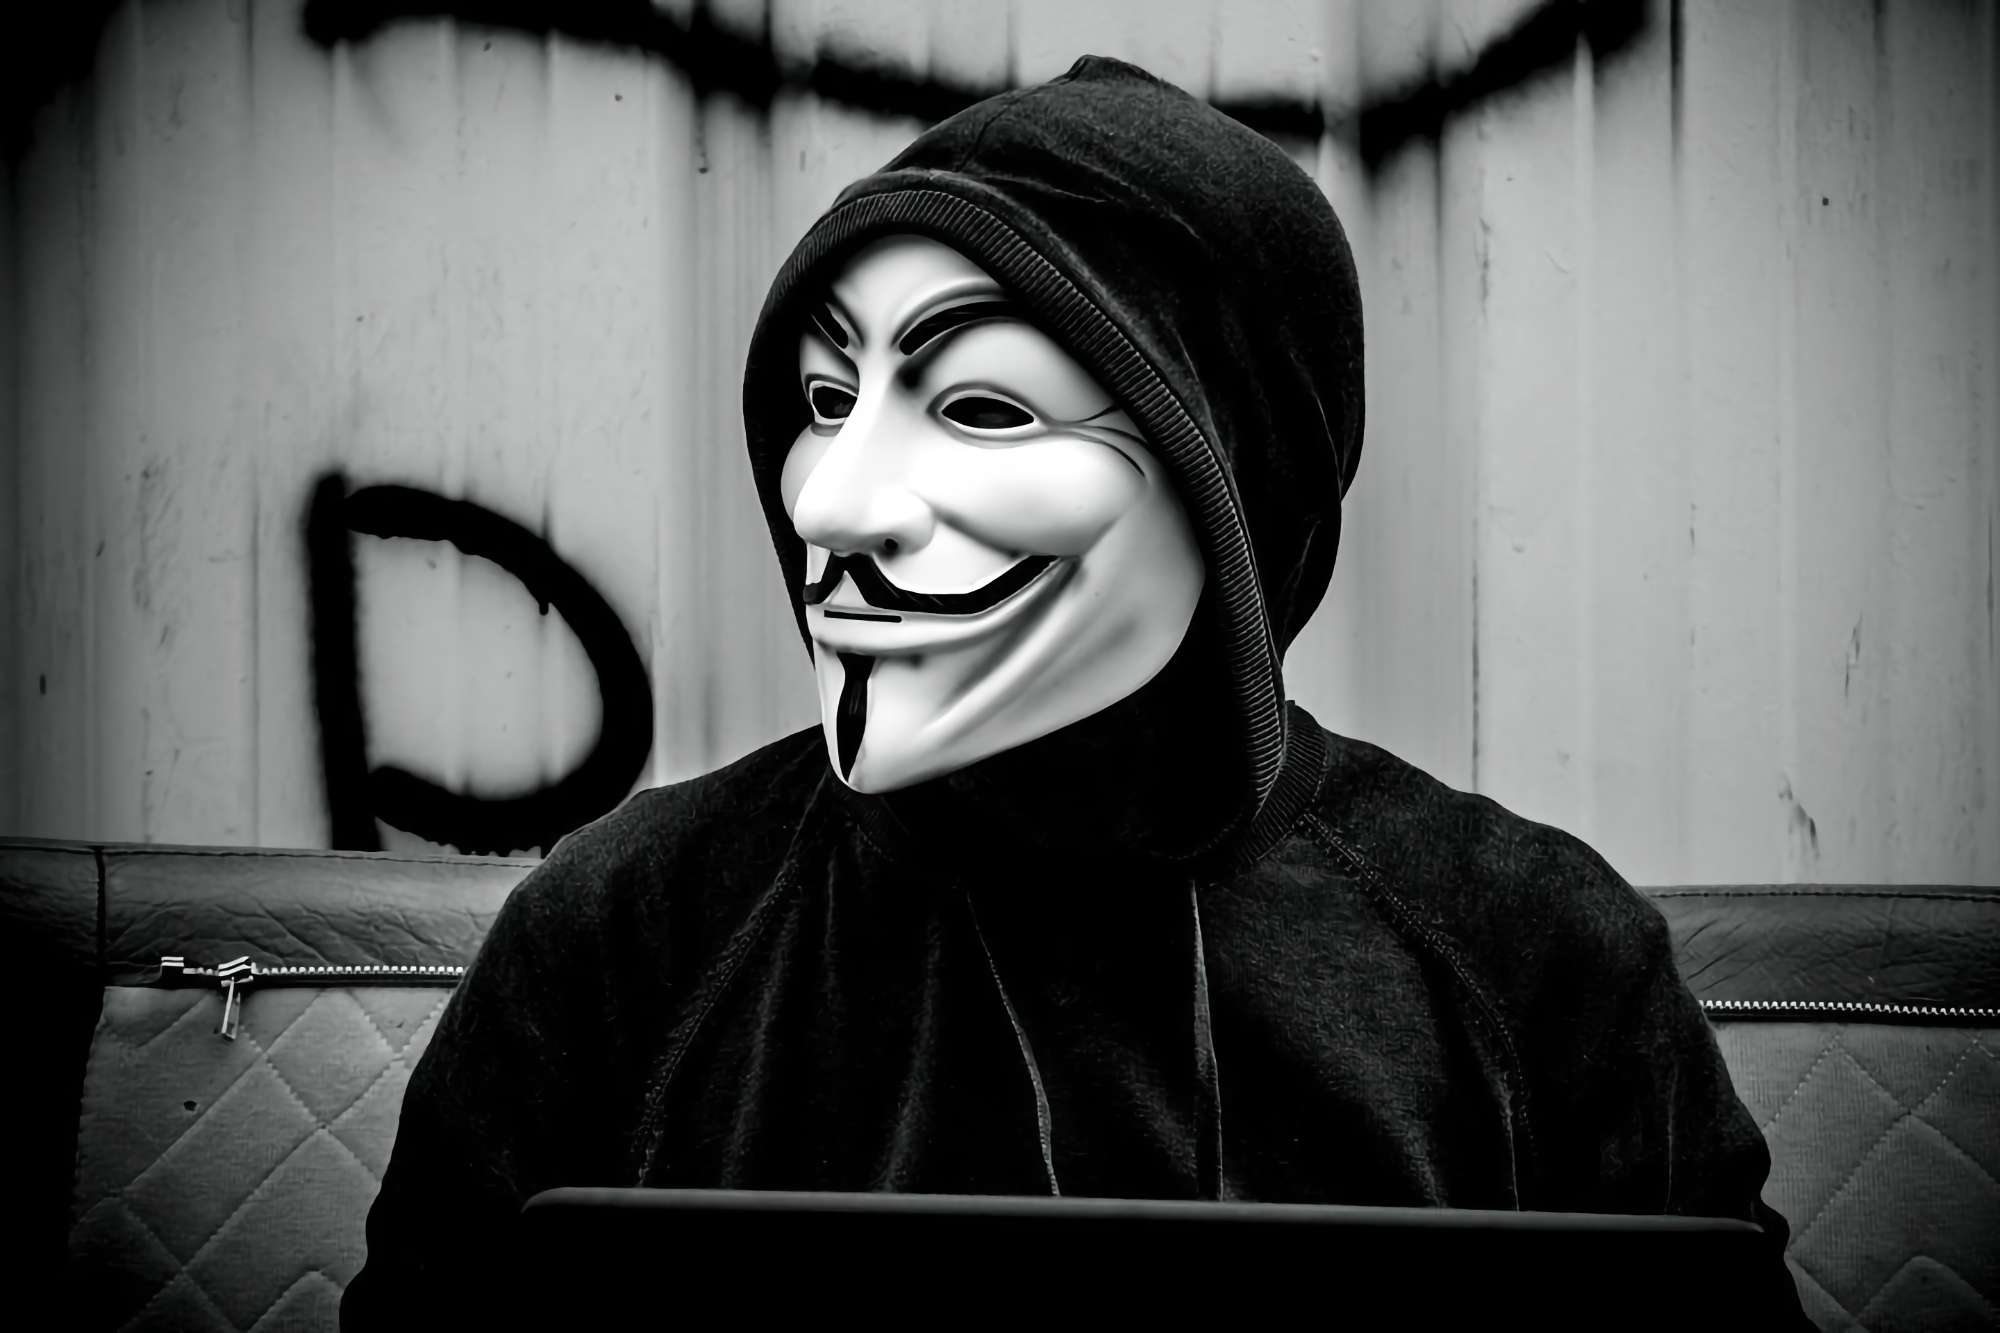 Anonymous hacked the Central Bank of the Russian Federation and stole more than 35,000 files